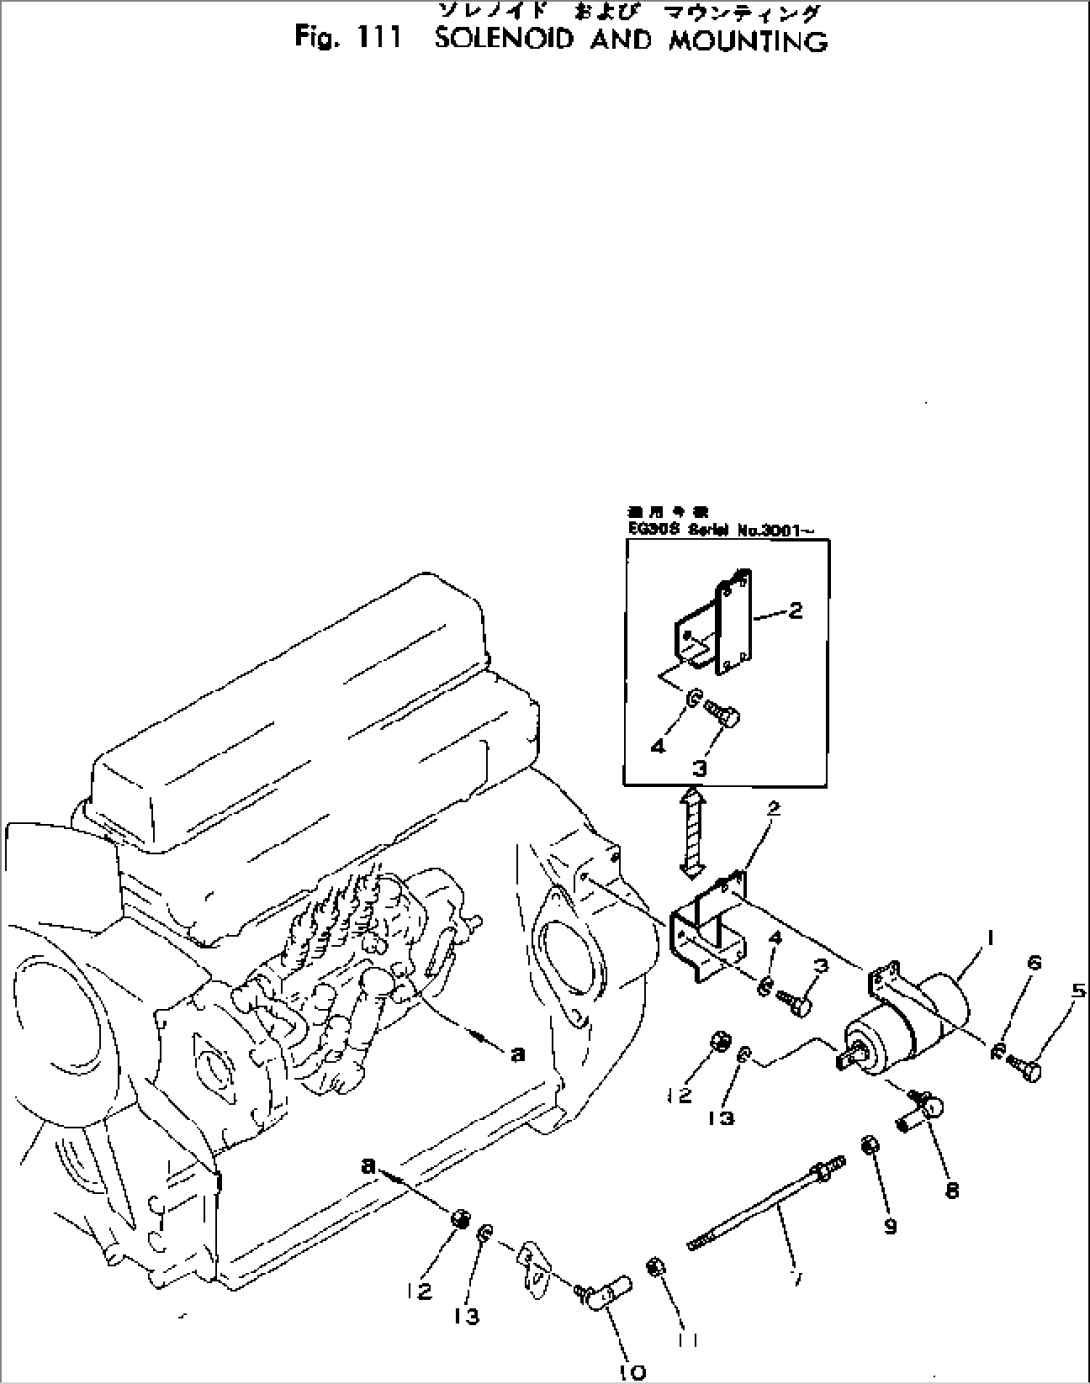 SOLENOID AND MOUNTING